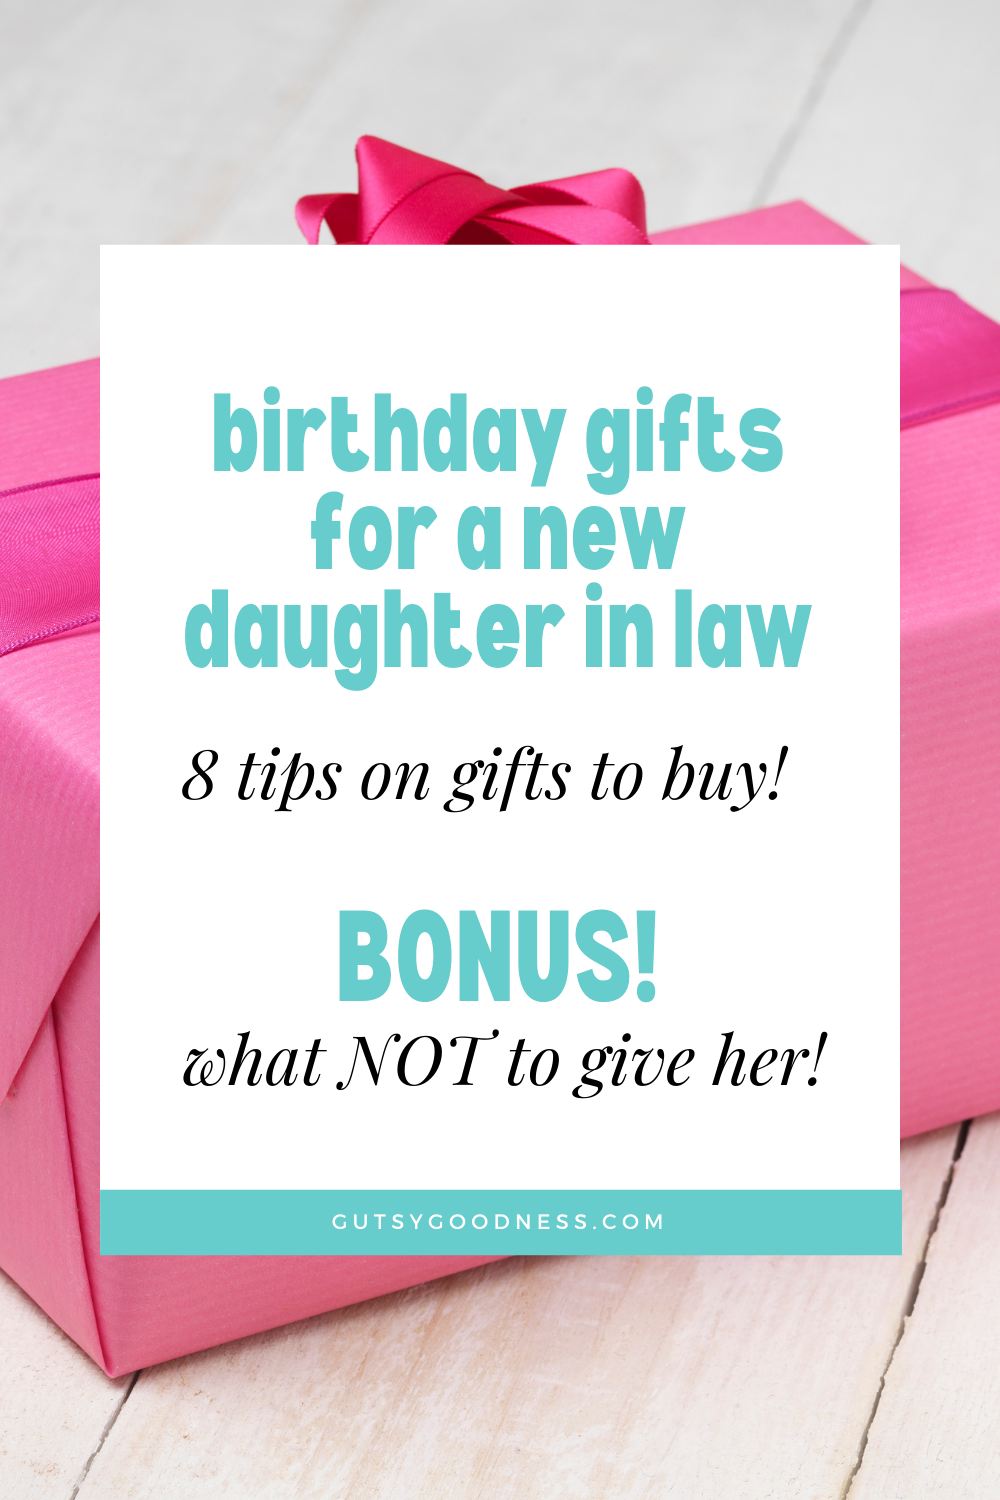 C8 Daughter In Law Birthday Gifts That Make Sure She Knows You Accept Her Completely